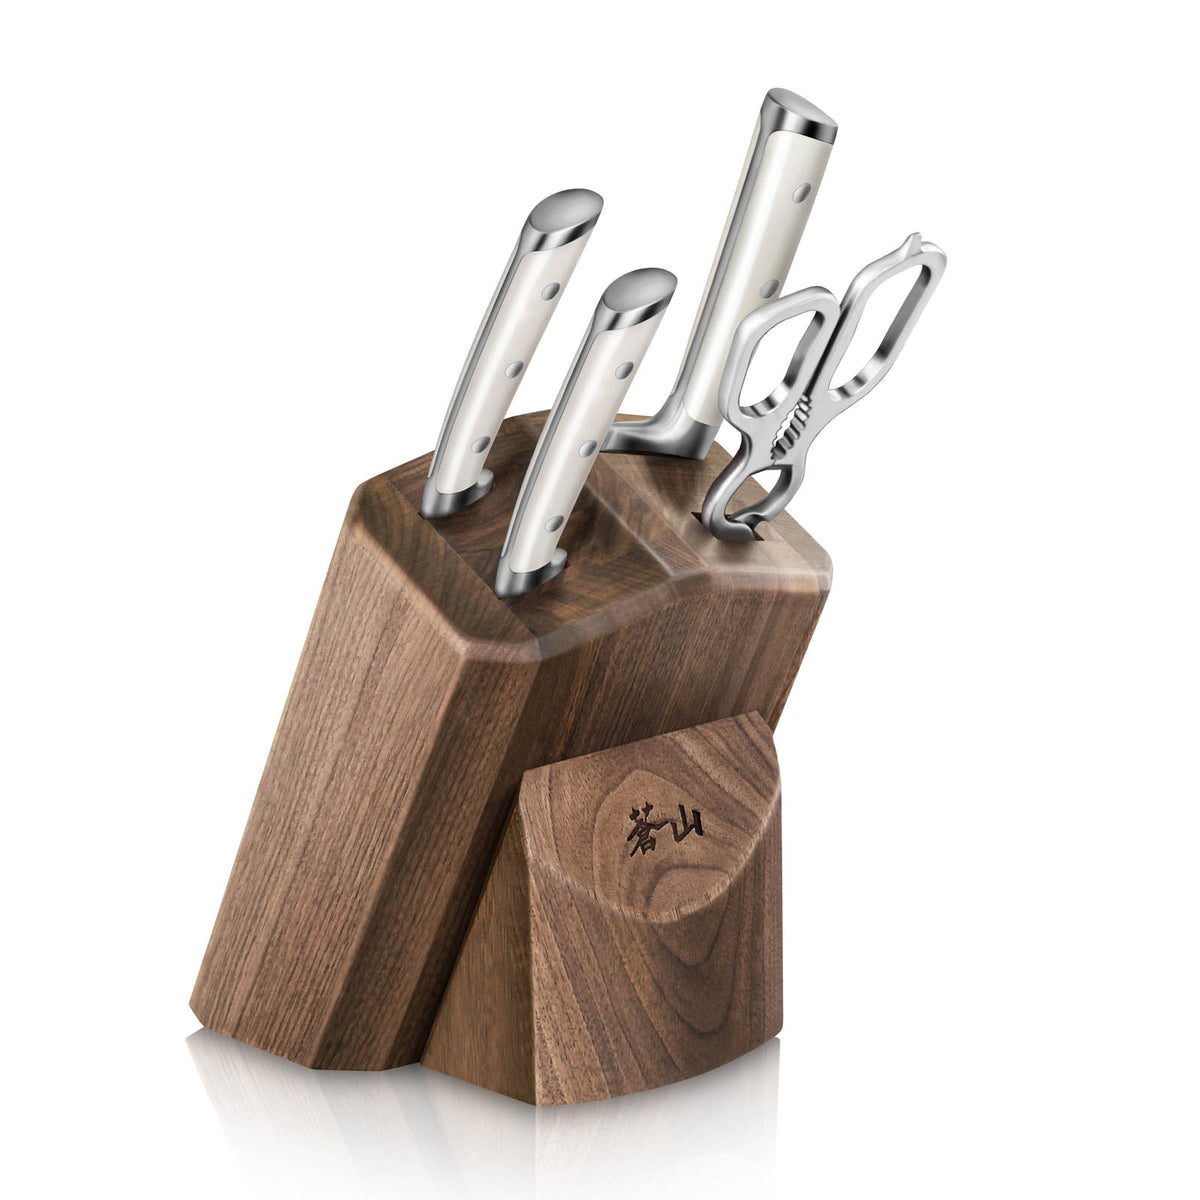 S & S1 Series 2-Piece Cleaver Knife Set, Forged German Steel